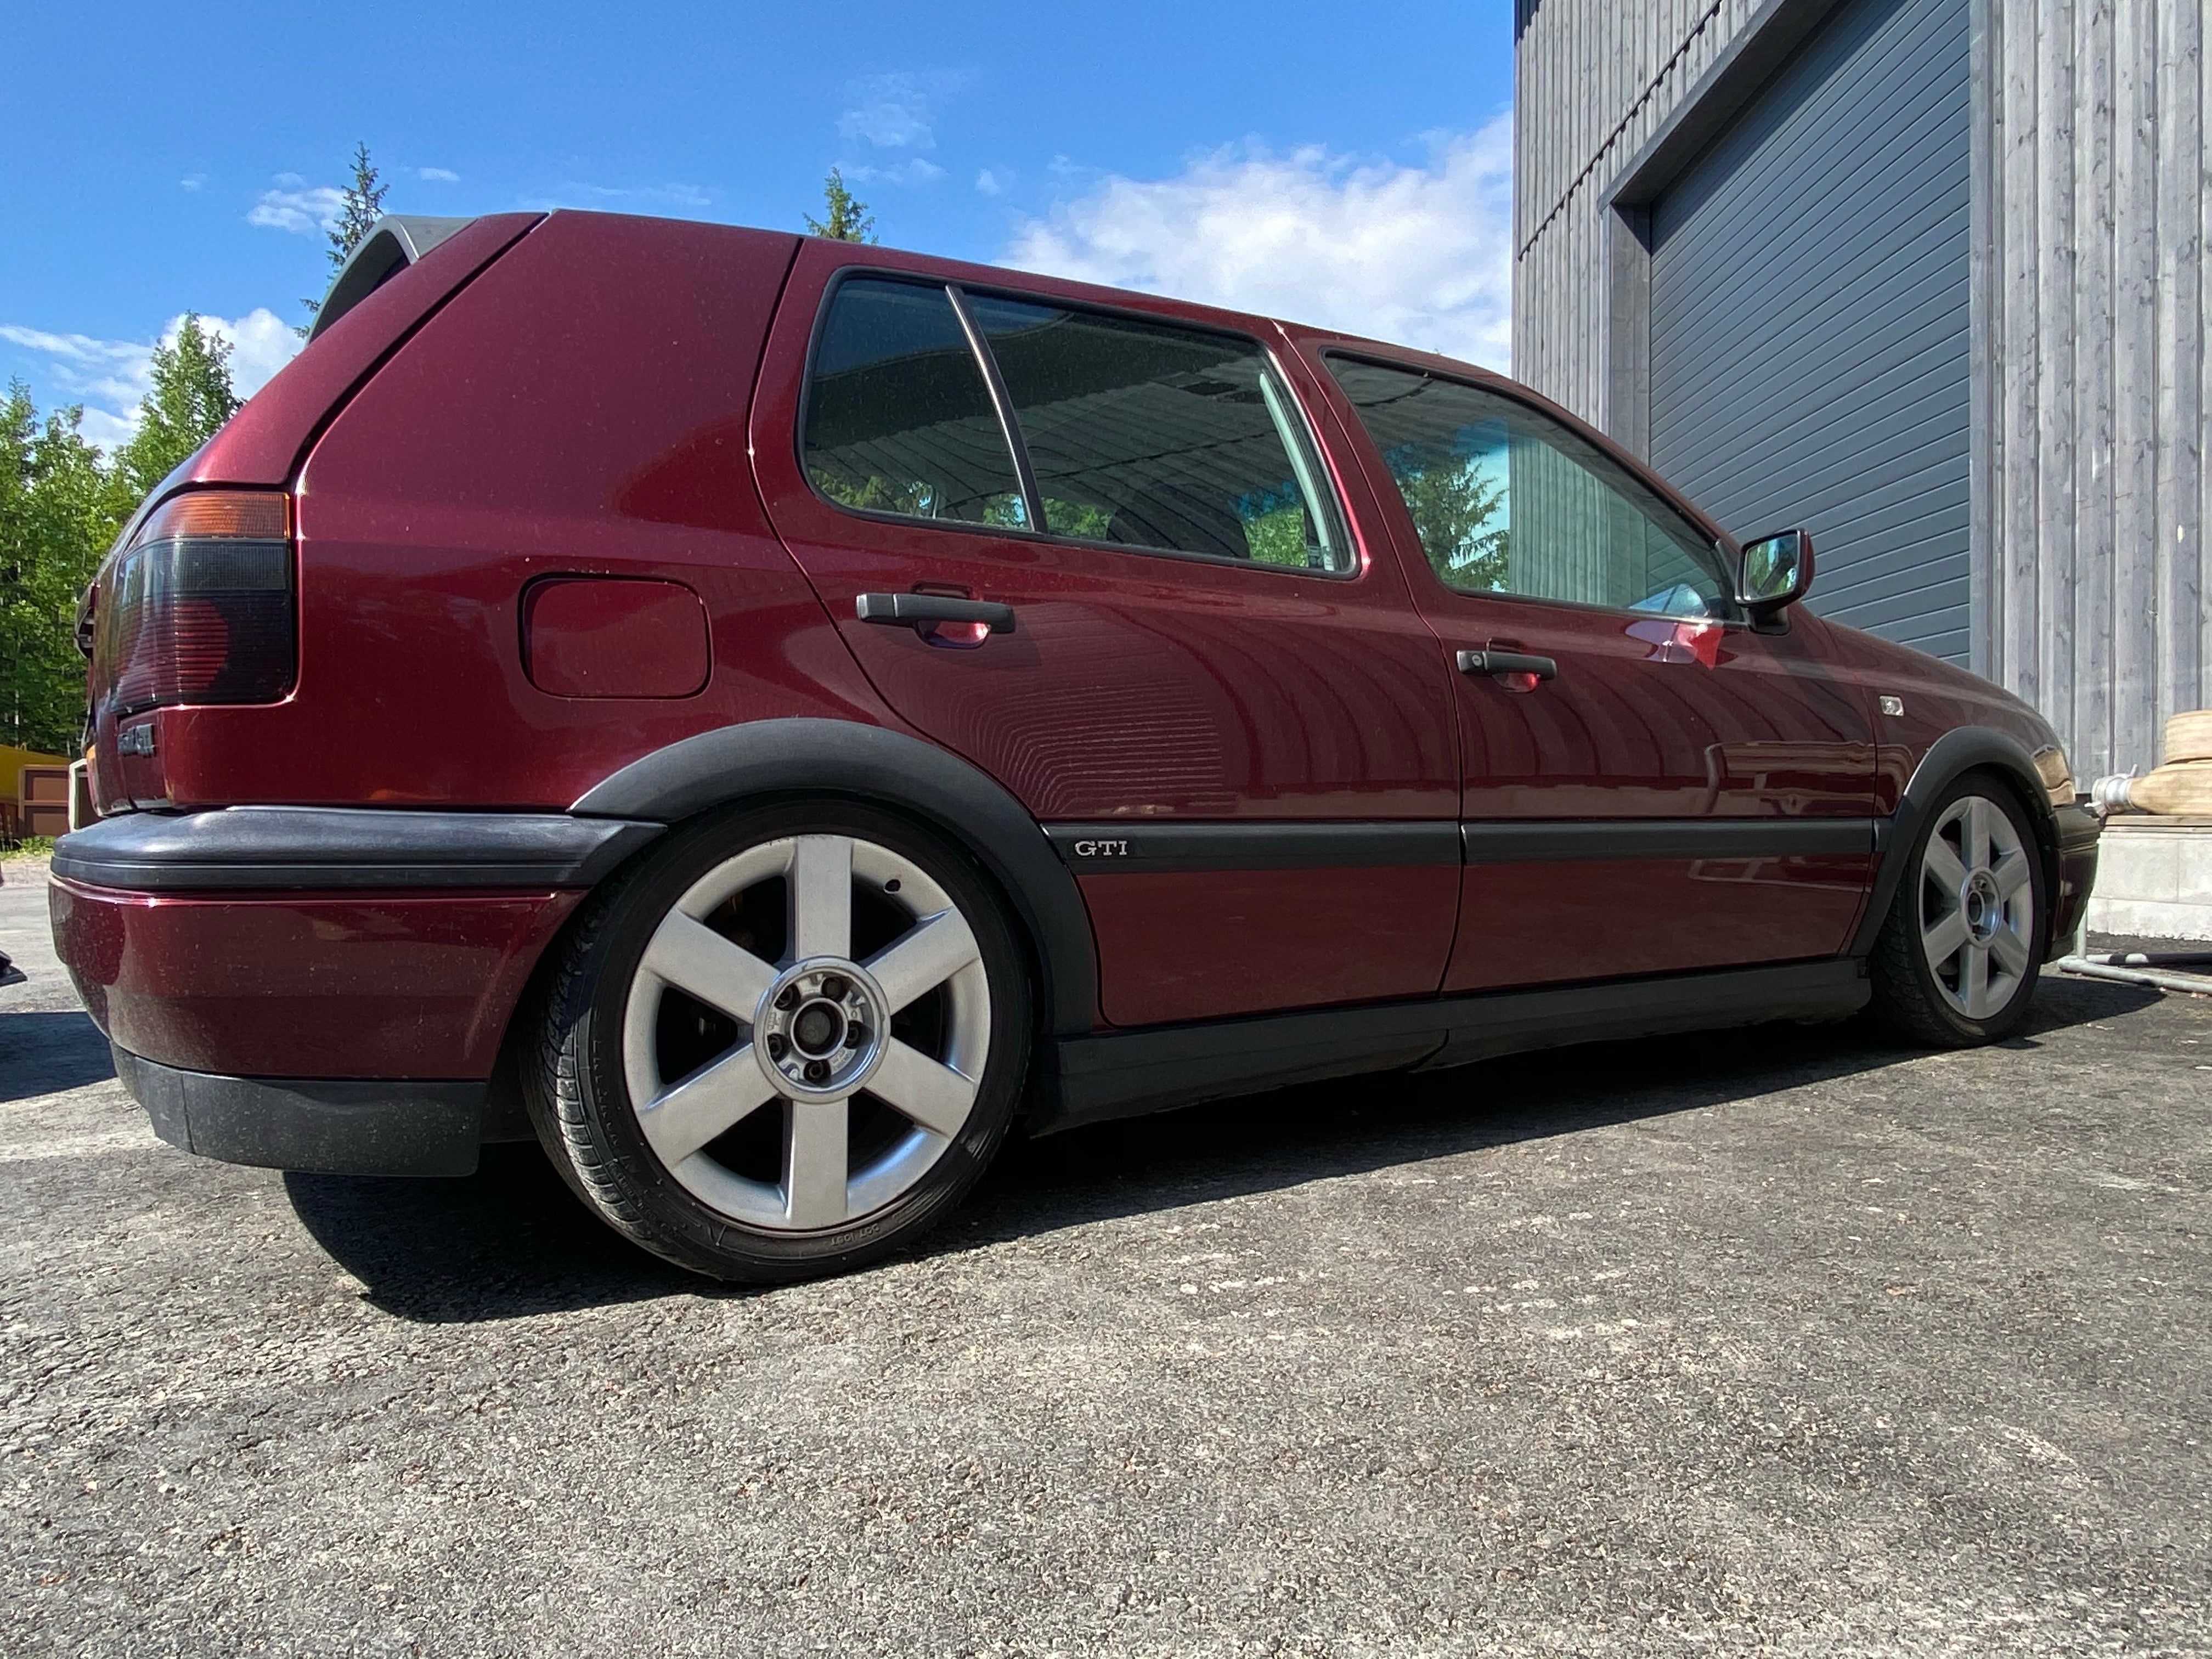 Can we update *Rare Golf mk3* color thread?